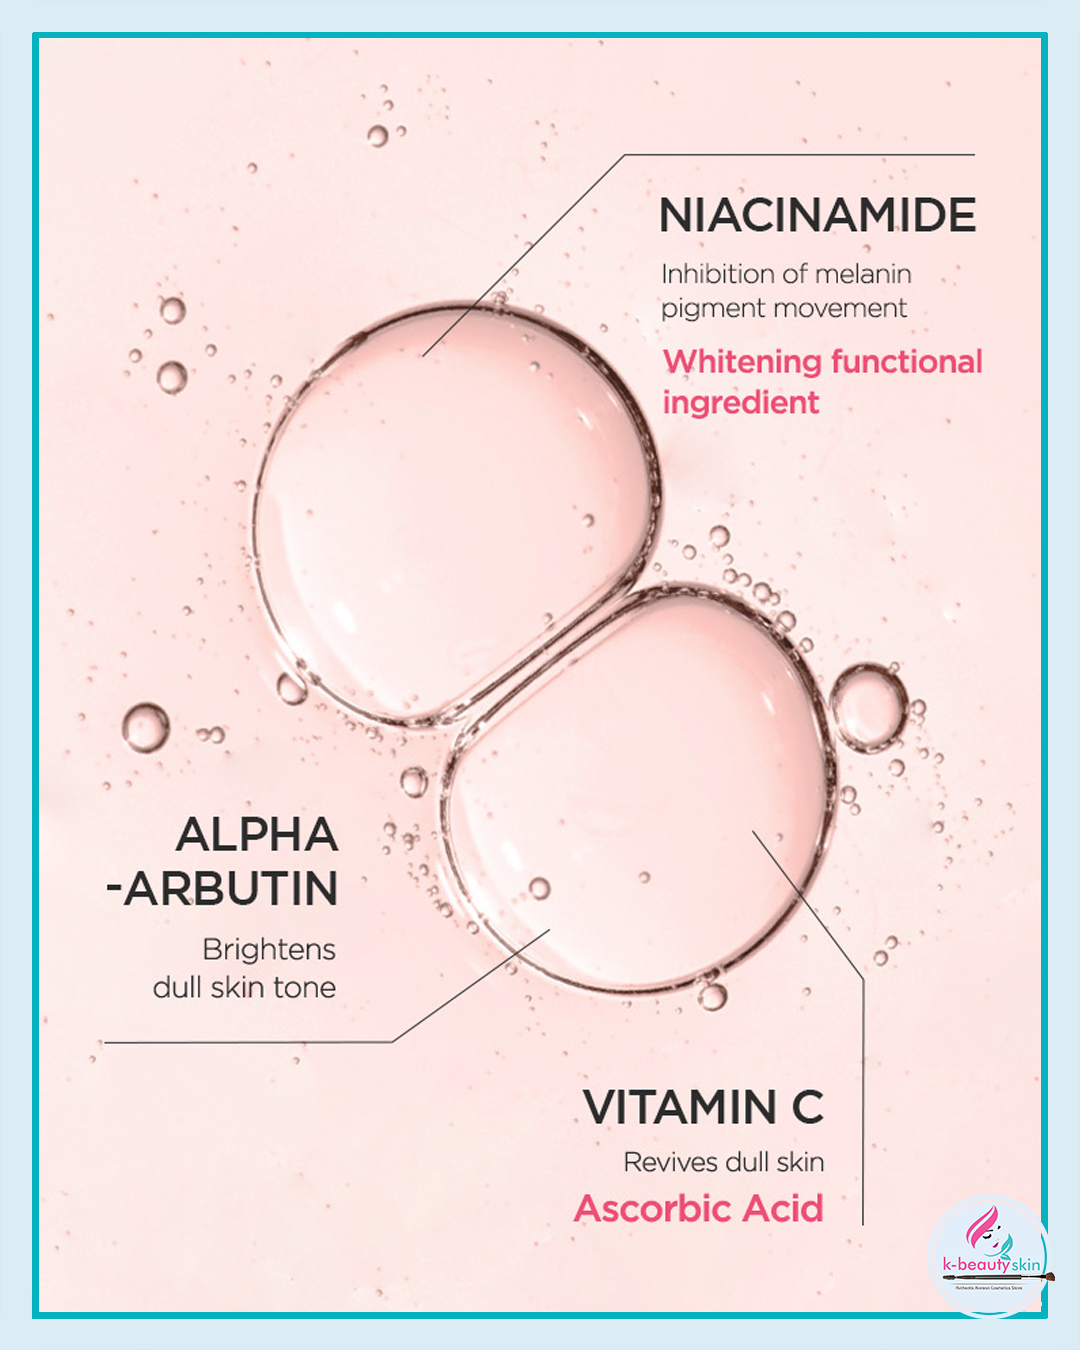 Brightens the skin by Alpha-Arbutin, Niacinamide and Vitamin C.